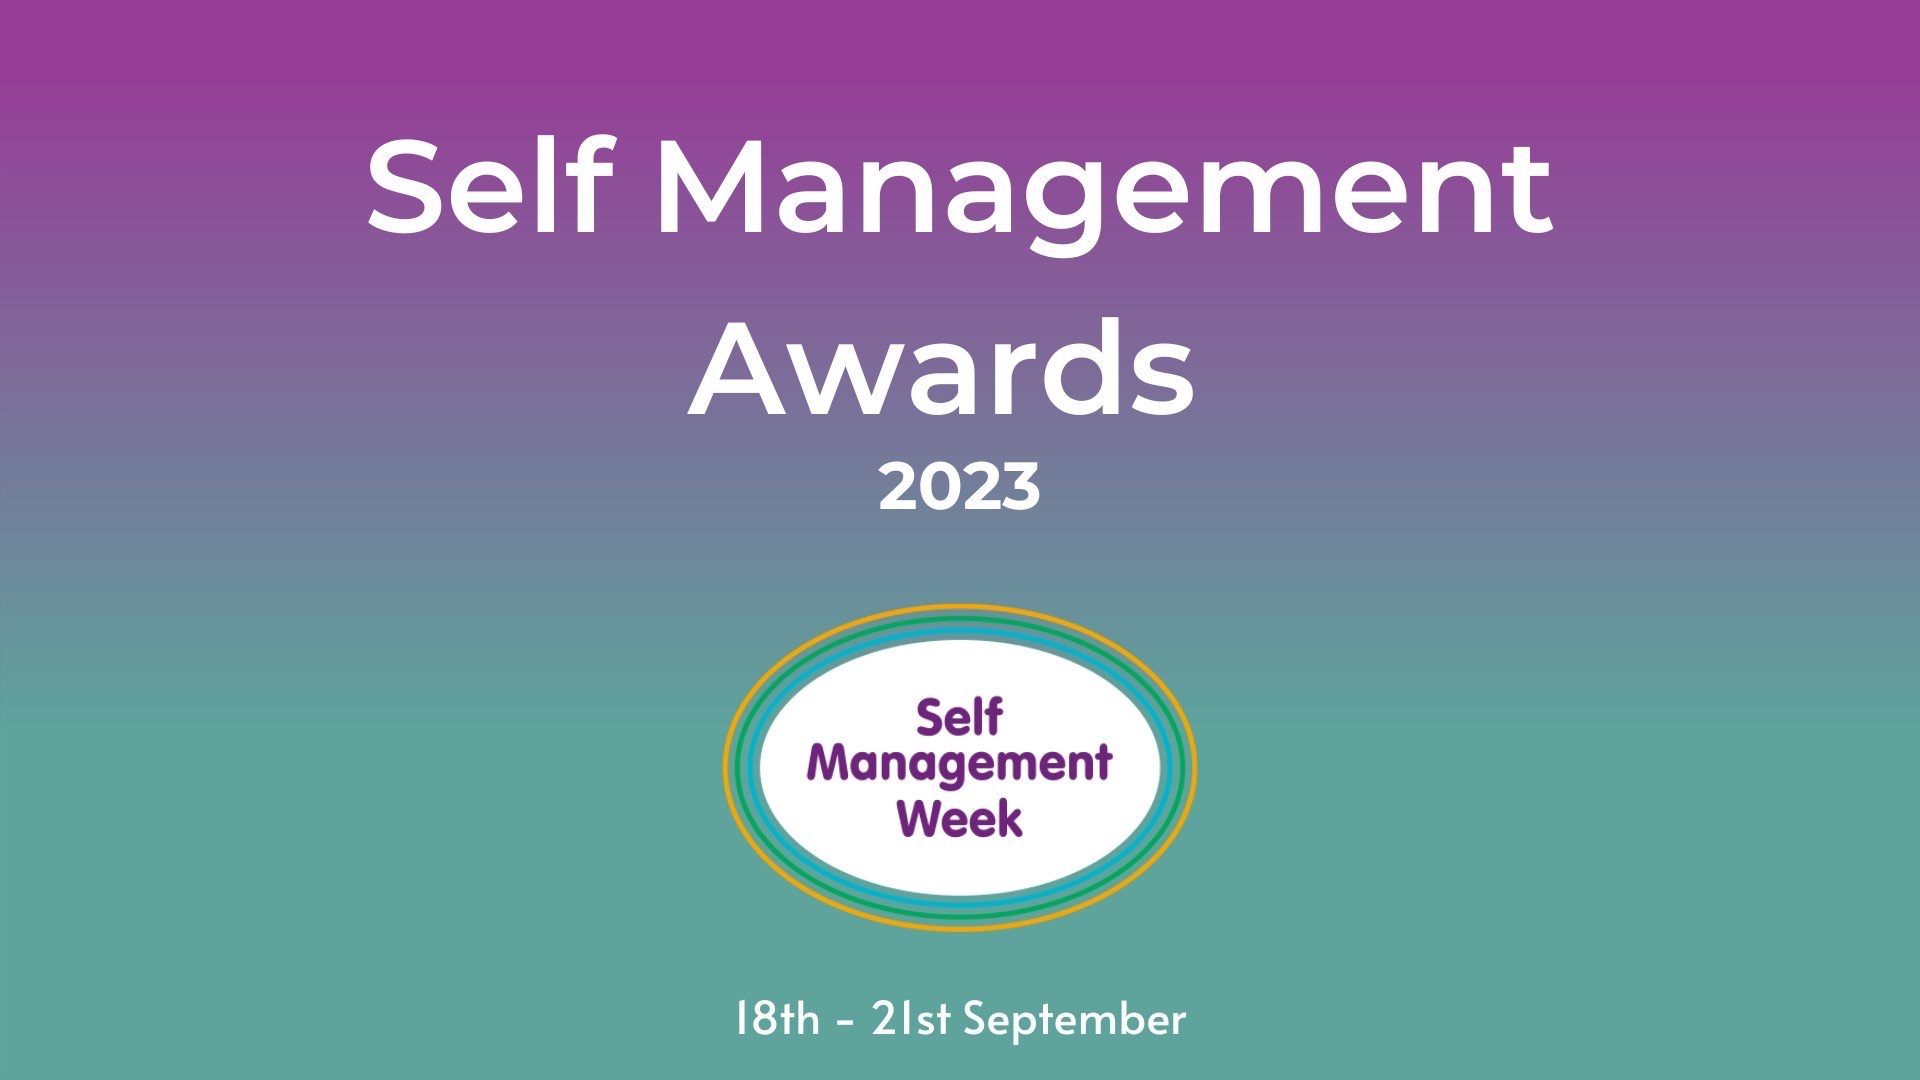  - SWAN wins ‘Self Management Resource of the Year’ Award